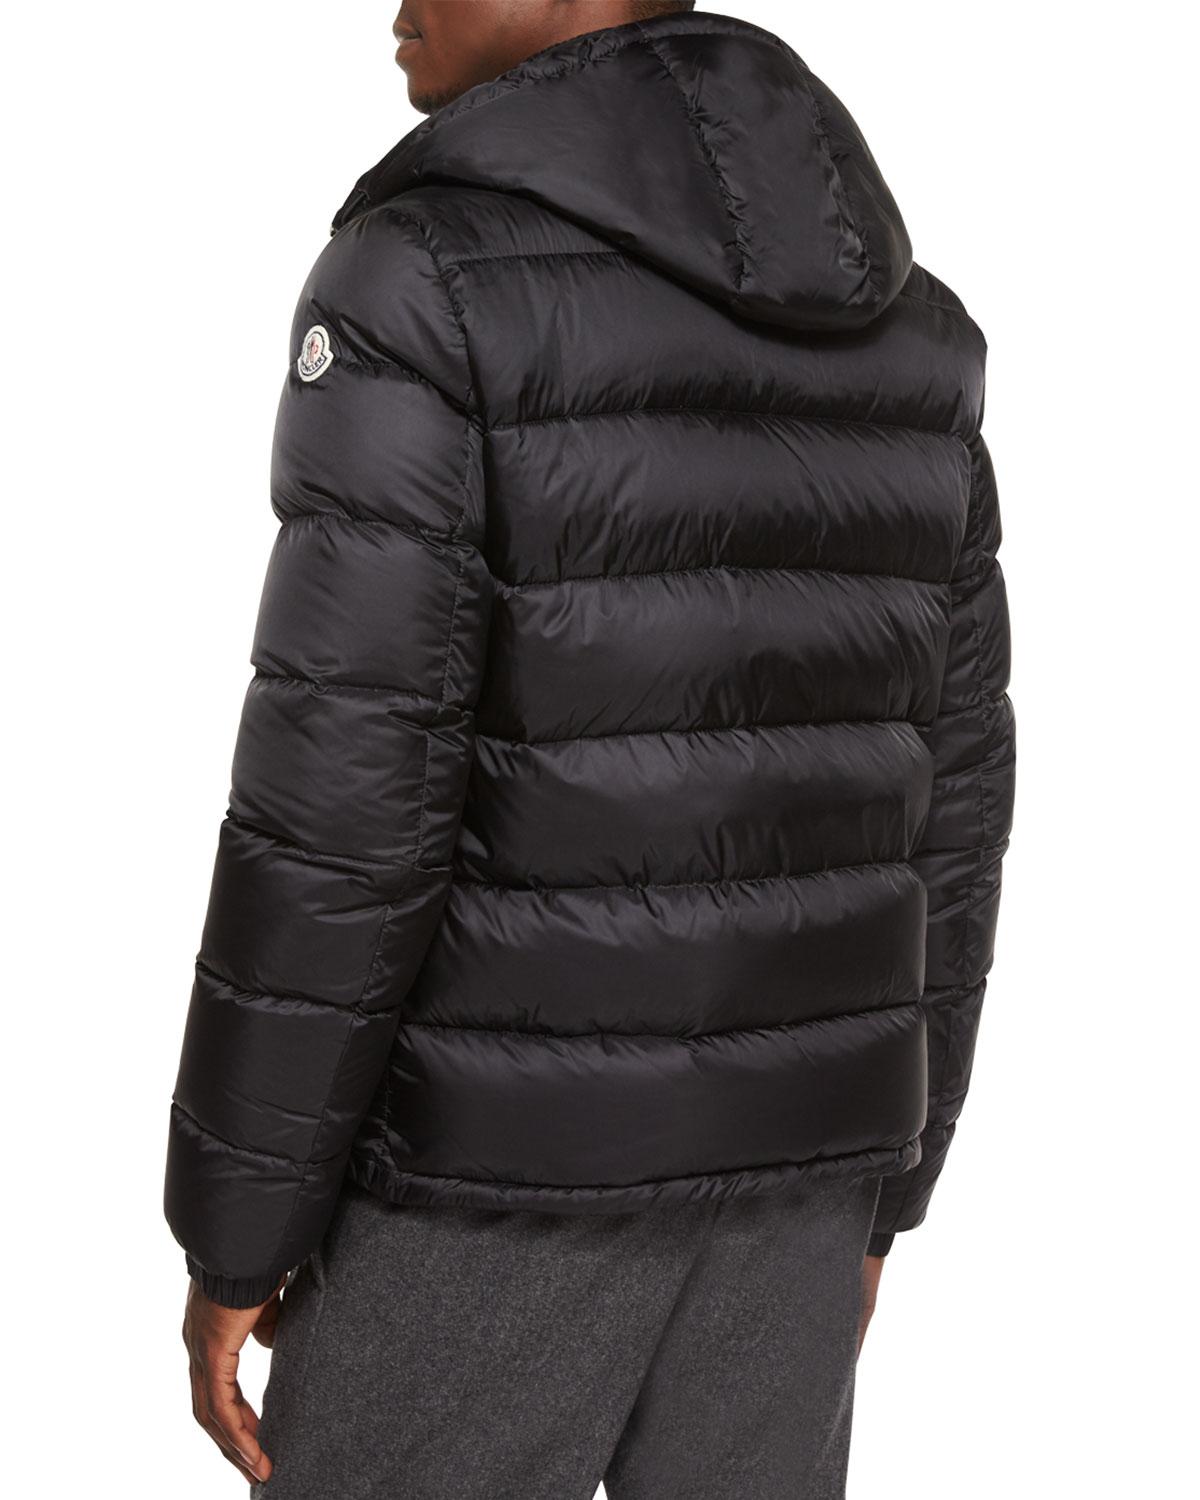 Lyst - Moncler Demar Quilted Puffer Jacket in Black for Men